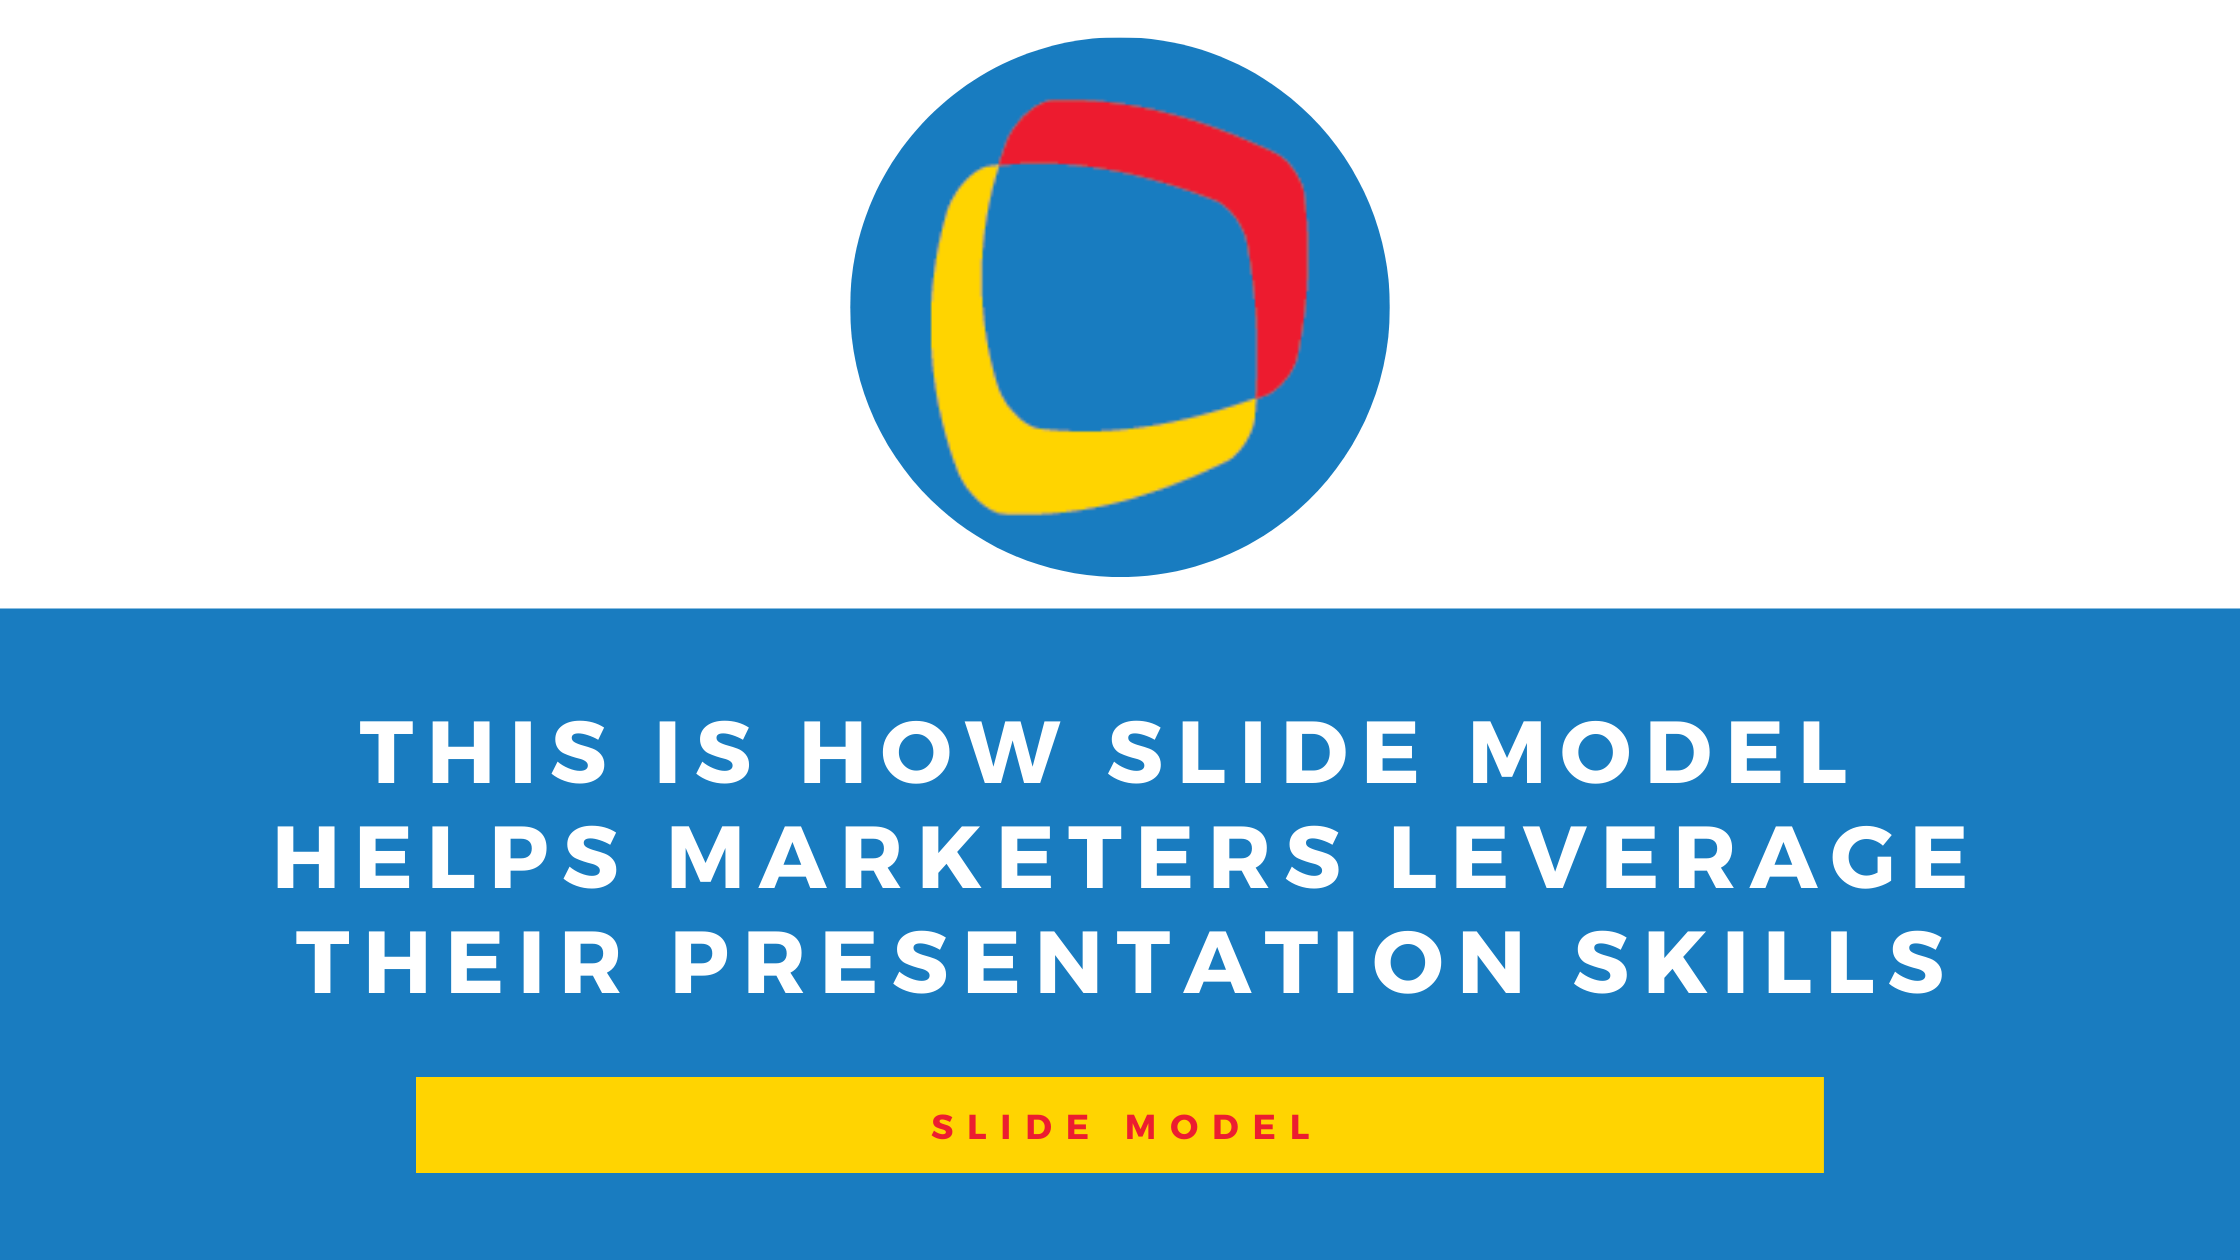 This is how Slide Model helps Marketers leverage their Presentation Skills